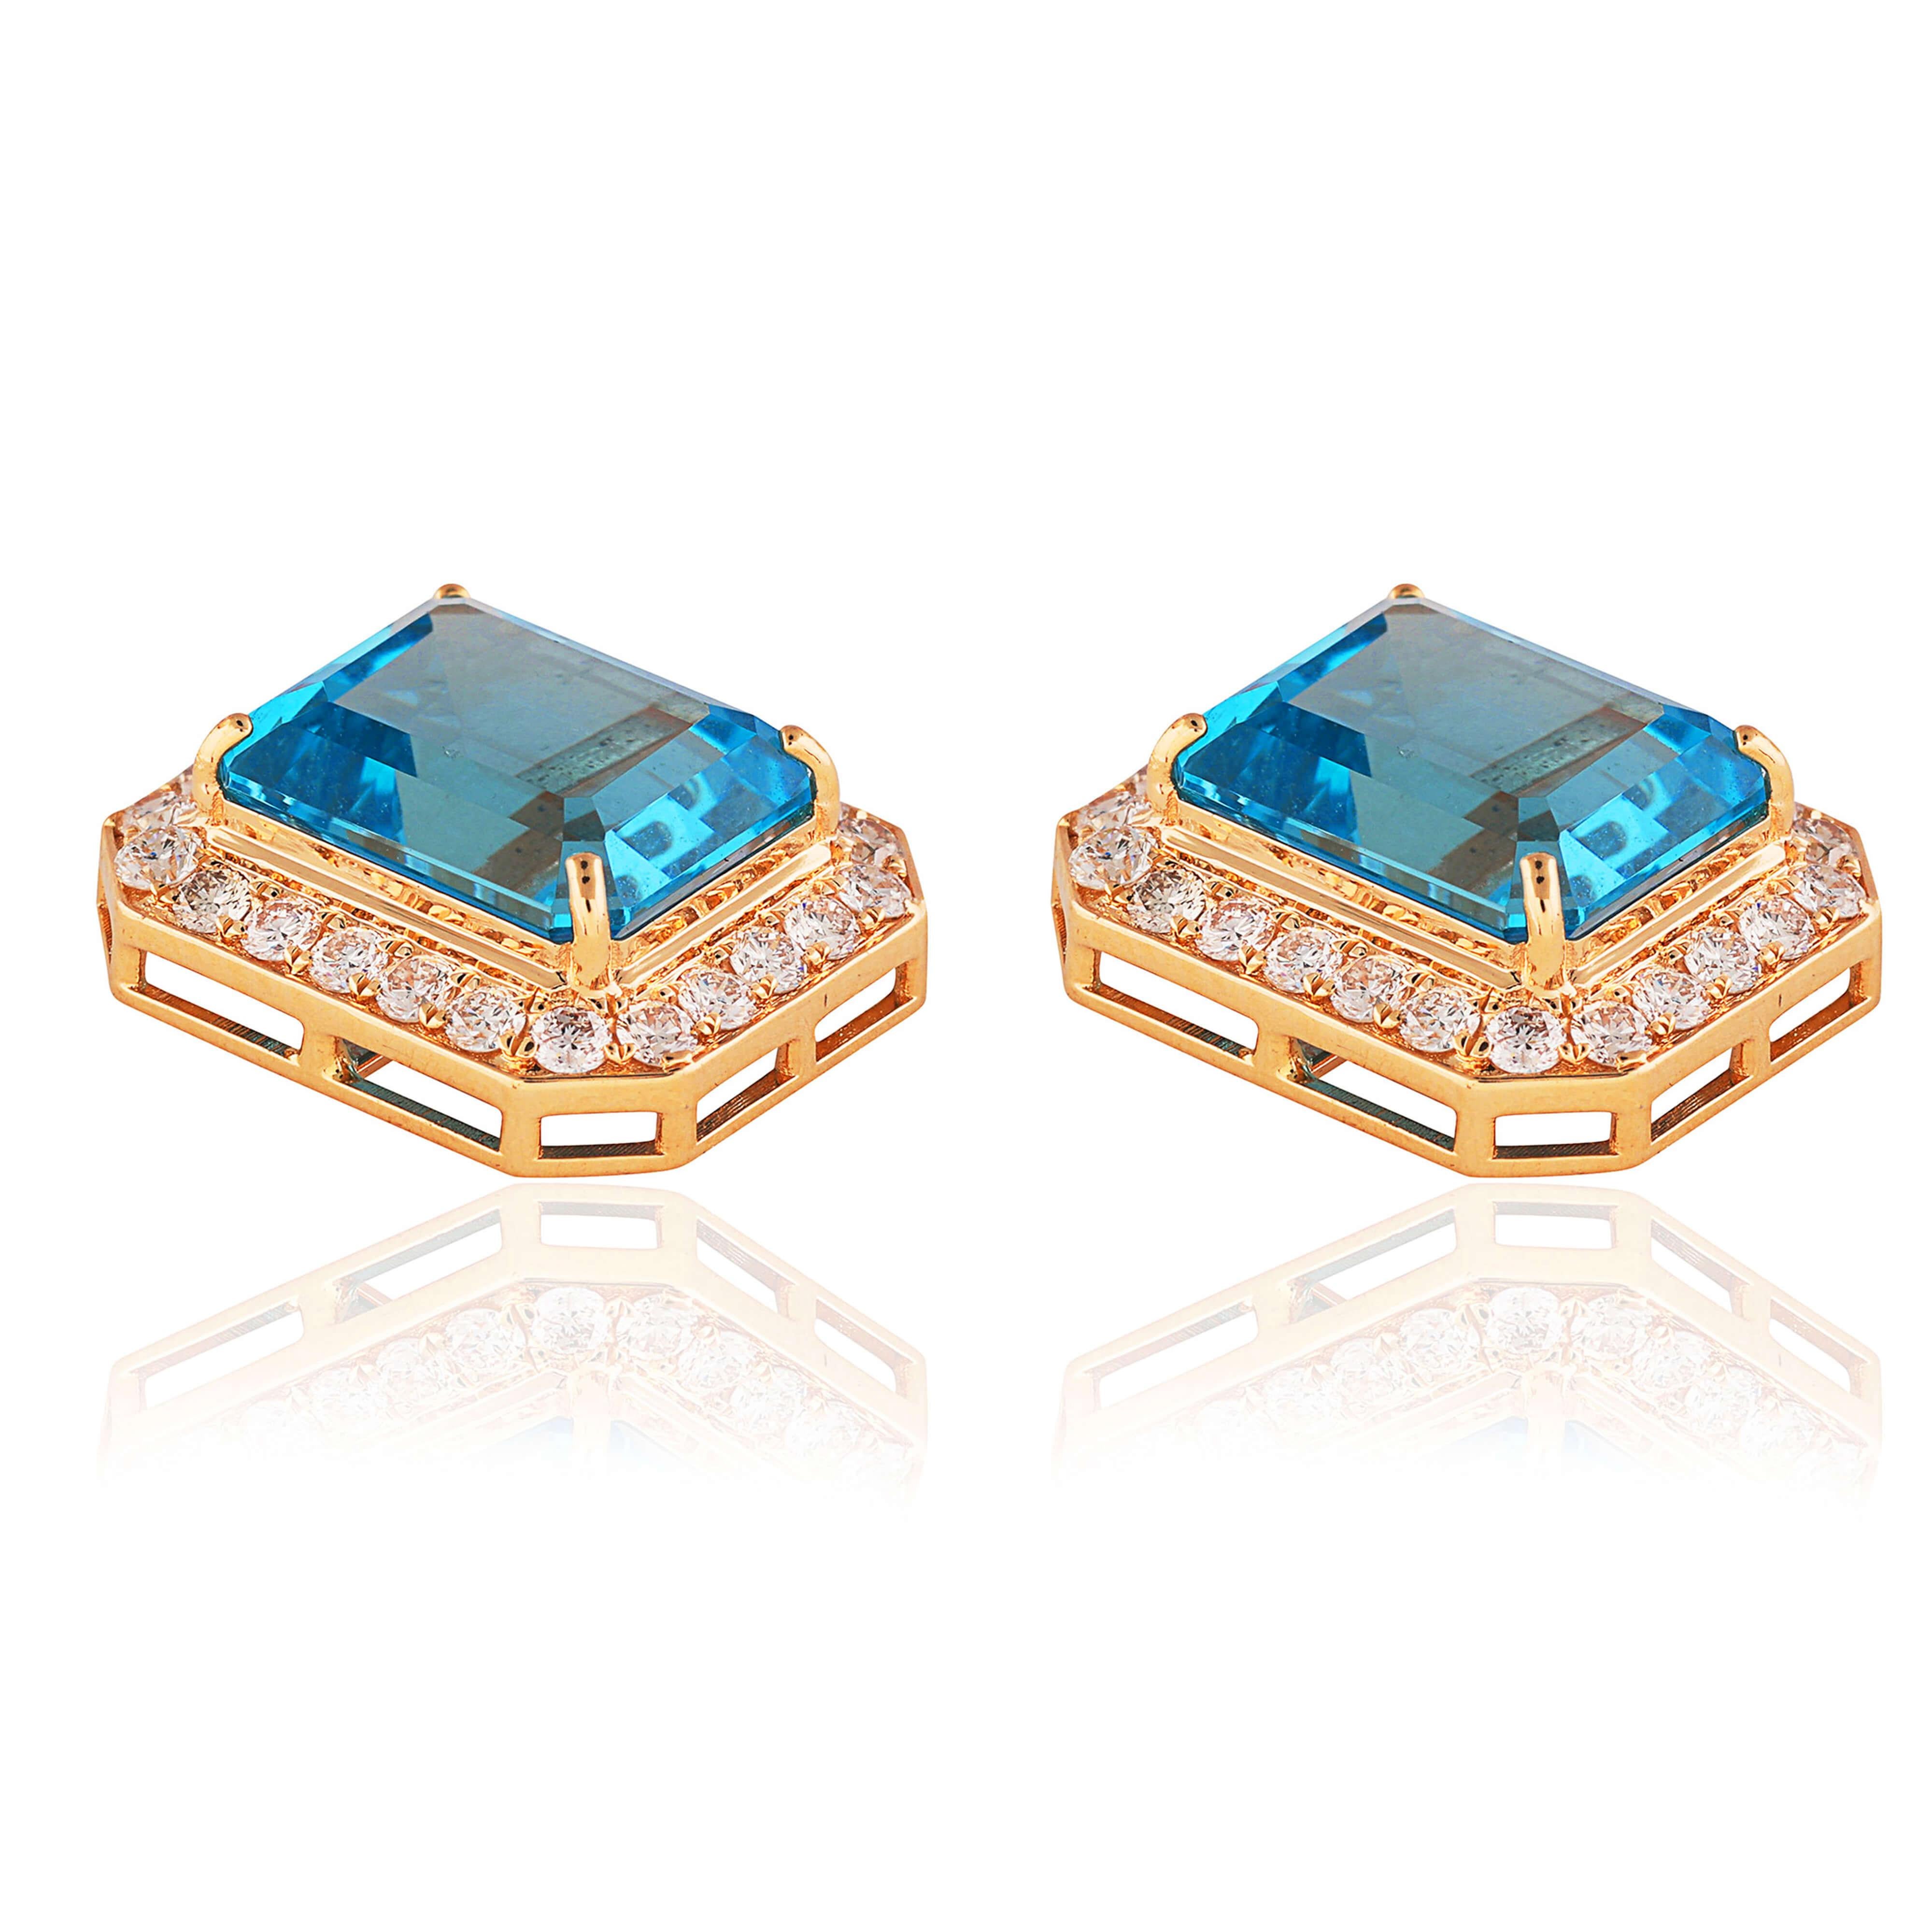 A forever piece of jewellery. A classic, an heirloom. A great (‘can’t go wrong) gift!
Set on 18kt gold with consciously sourced round cut brilliant diamonds and high blue topaz stones.
It is 4.16 grams 18kt gold; 0.74 carat round brilliant cut